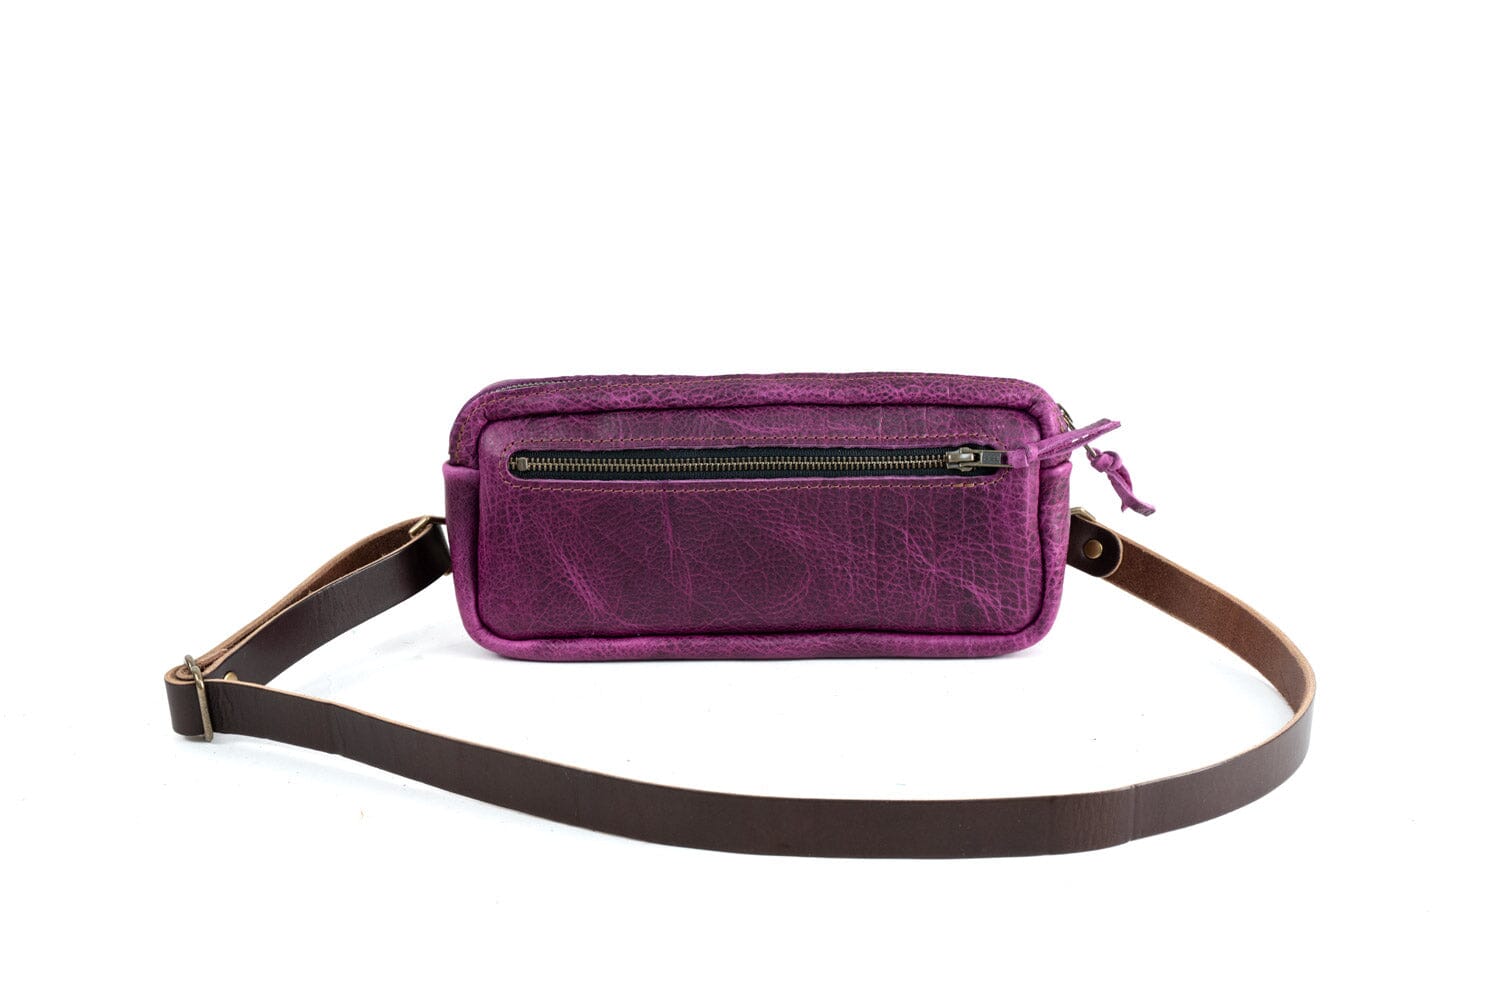 LEATHER FANNY PACK / LEATHER WAIST BAG - DELUXE - GRAPE BISON